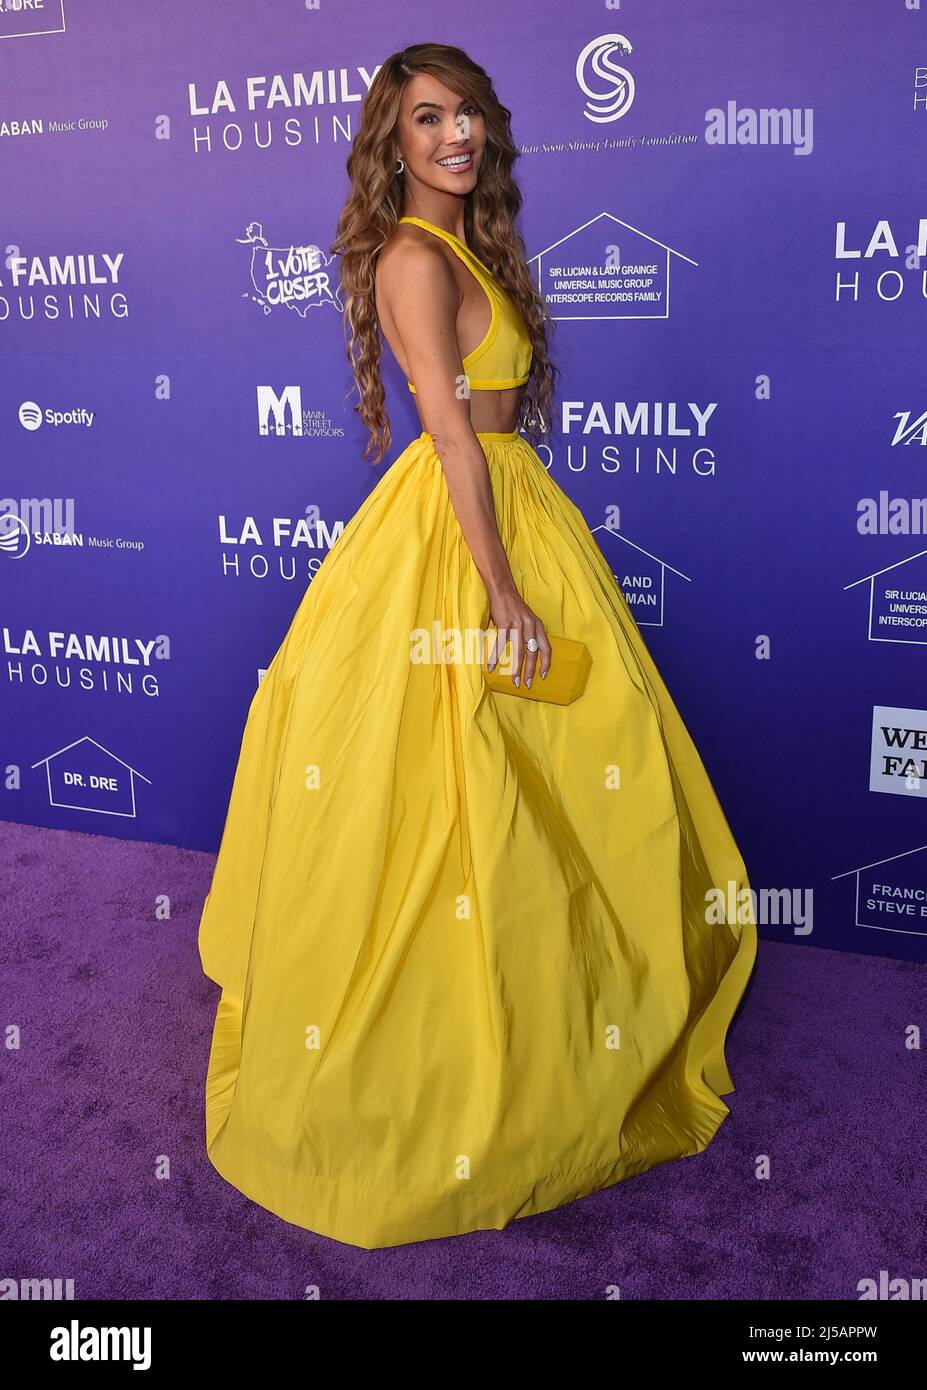 Los Angeles, USA. 21st Apr, 2022. Chrishell Stause arriving to the LA Family Housing's 2022 Awards held at the Pacific Design Center in West Hollywood, CA on April 21, 2022 © OConnor / AFF-USA.com Credit: AFF/Alamy Live News Stock Photo